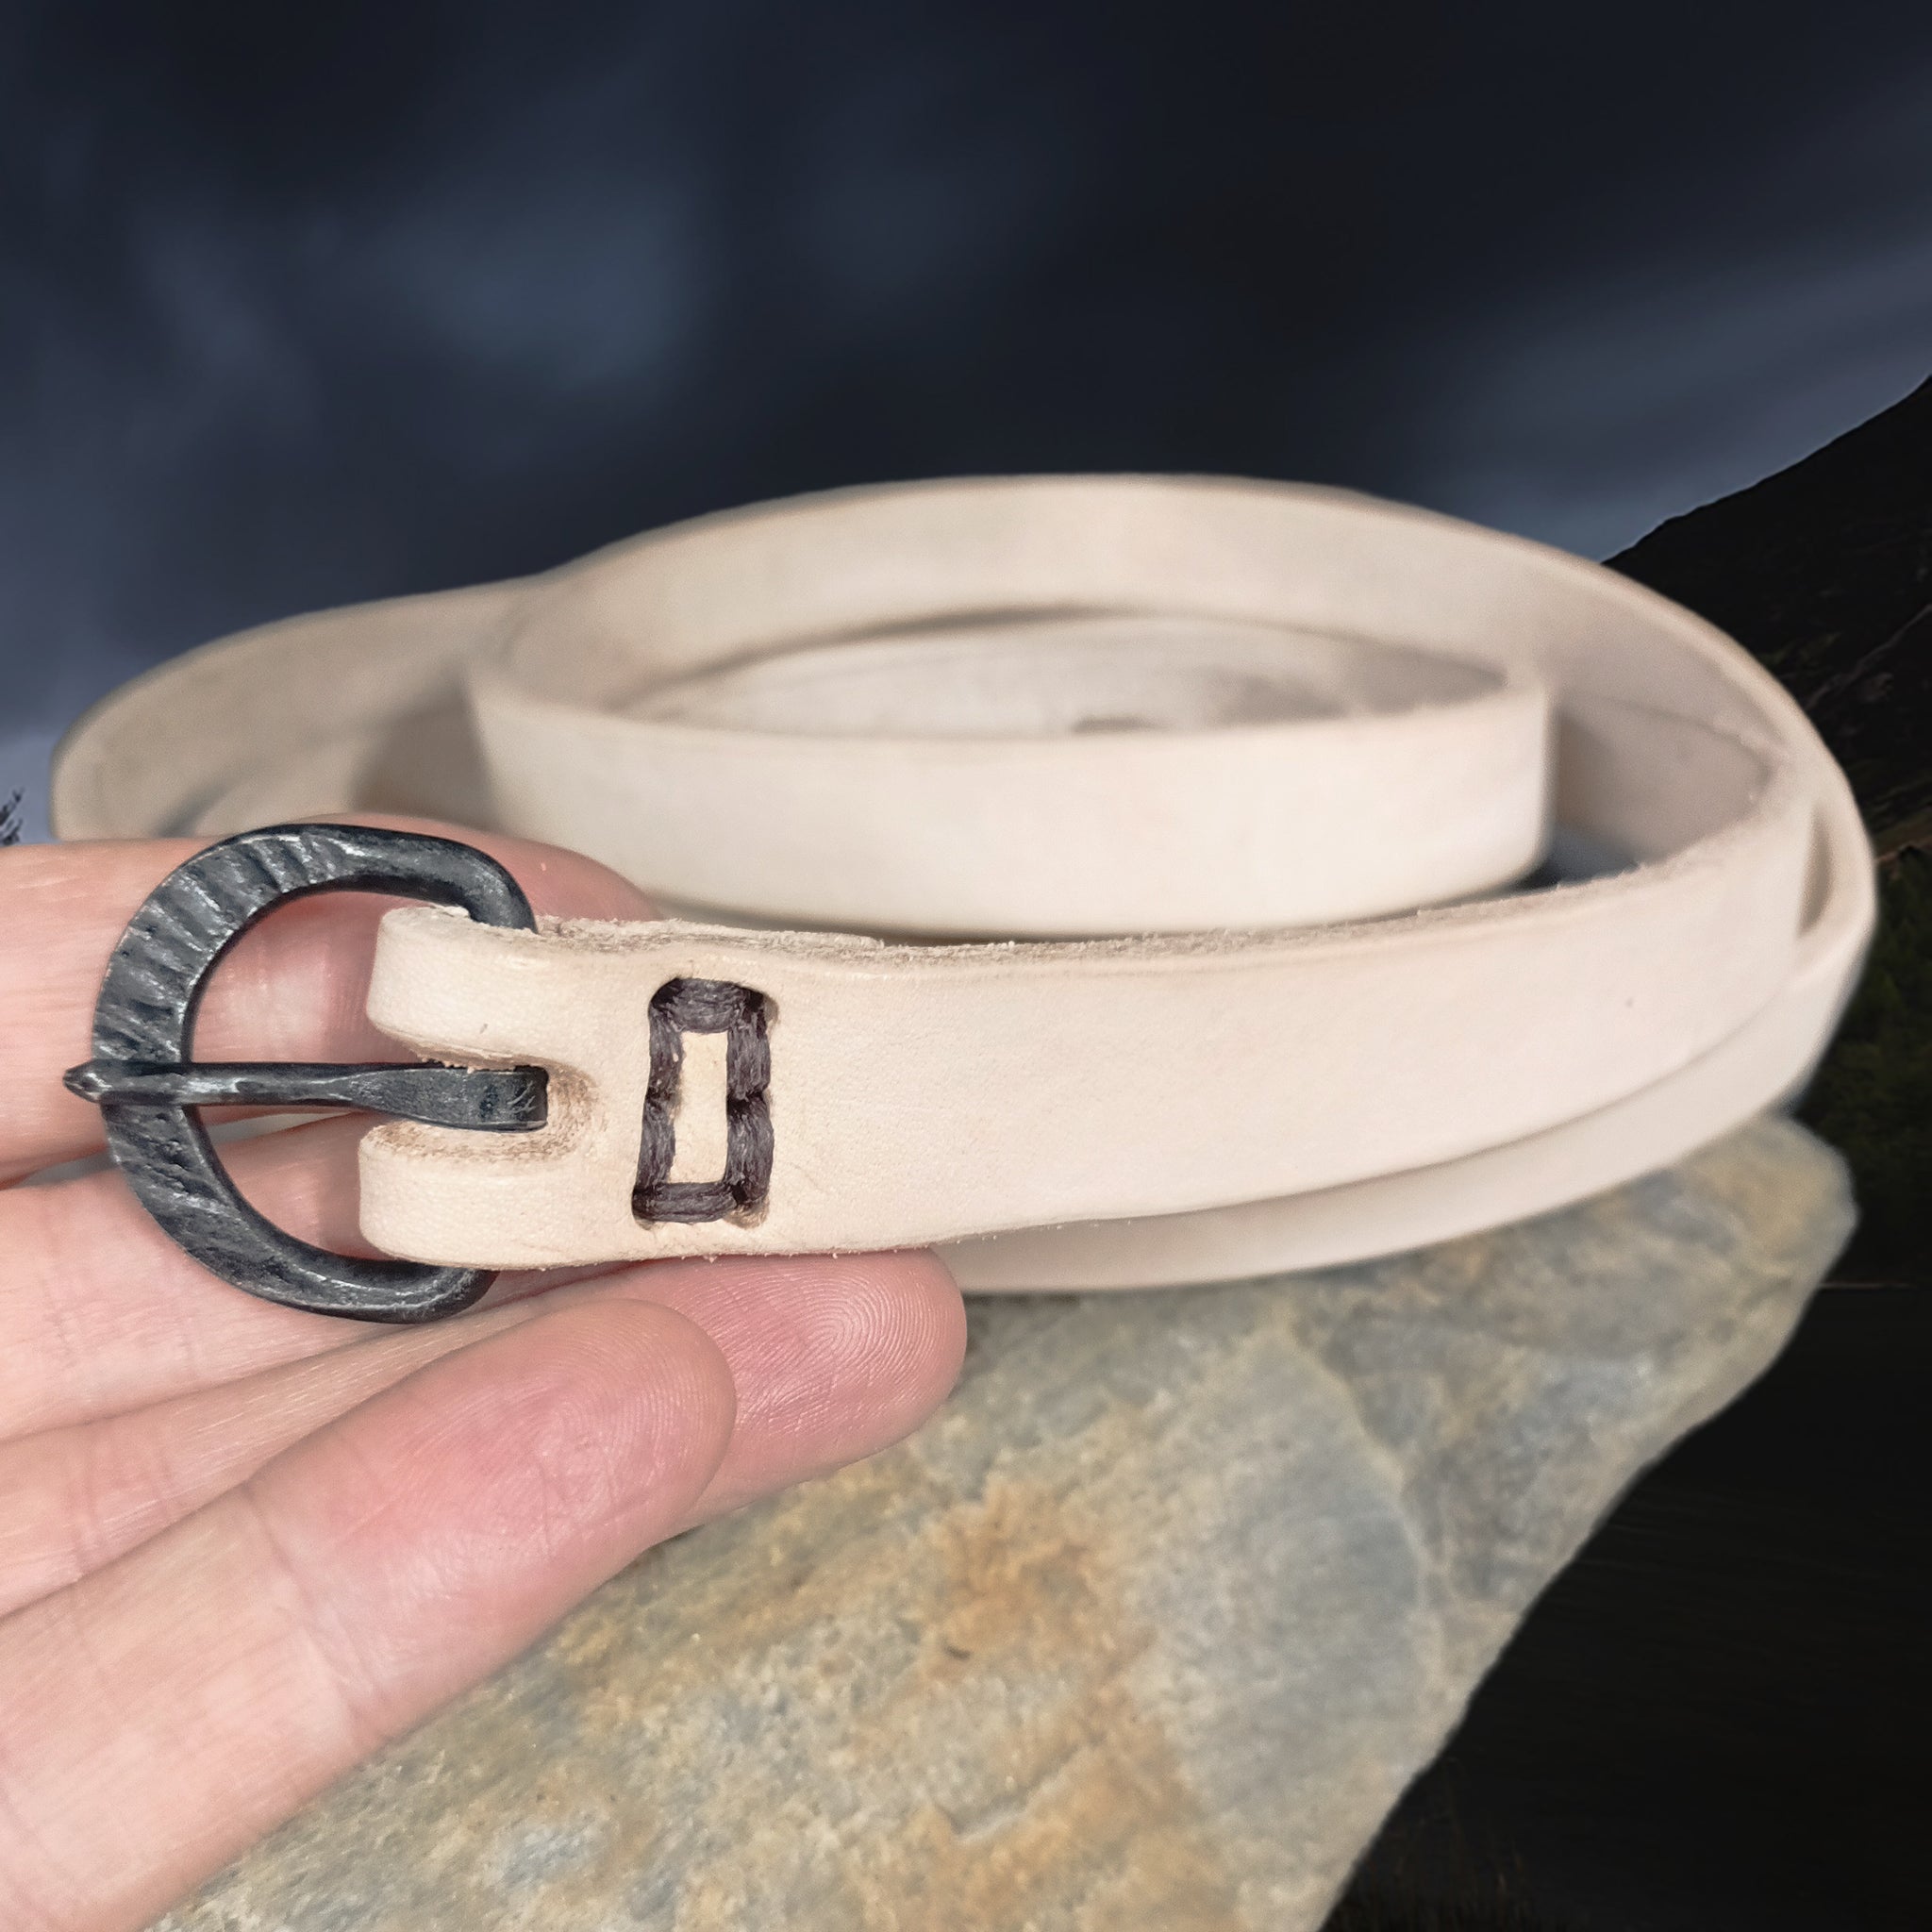 Long Natural Veg Tan Leather Viking / Medieval Belt with Hand-Forged Iron Buckle - 20mm (0.75 inch) Width